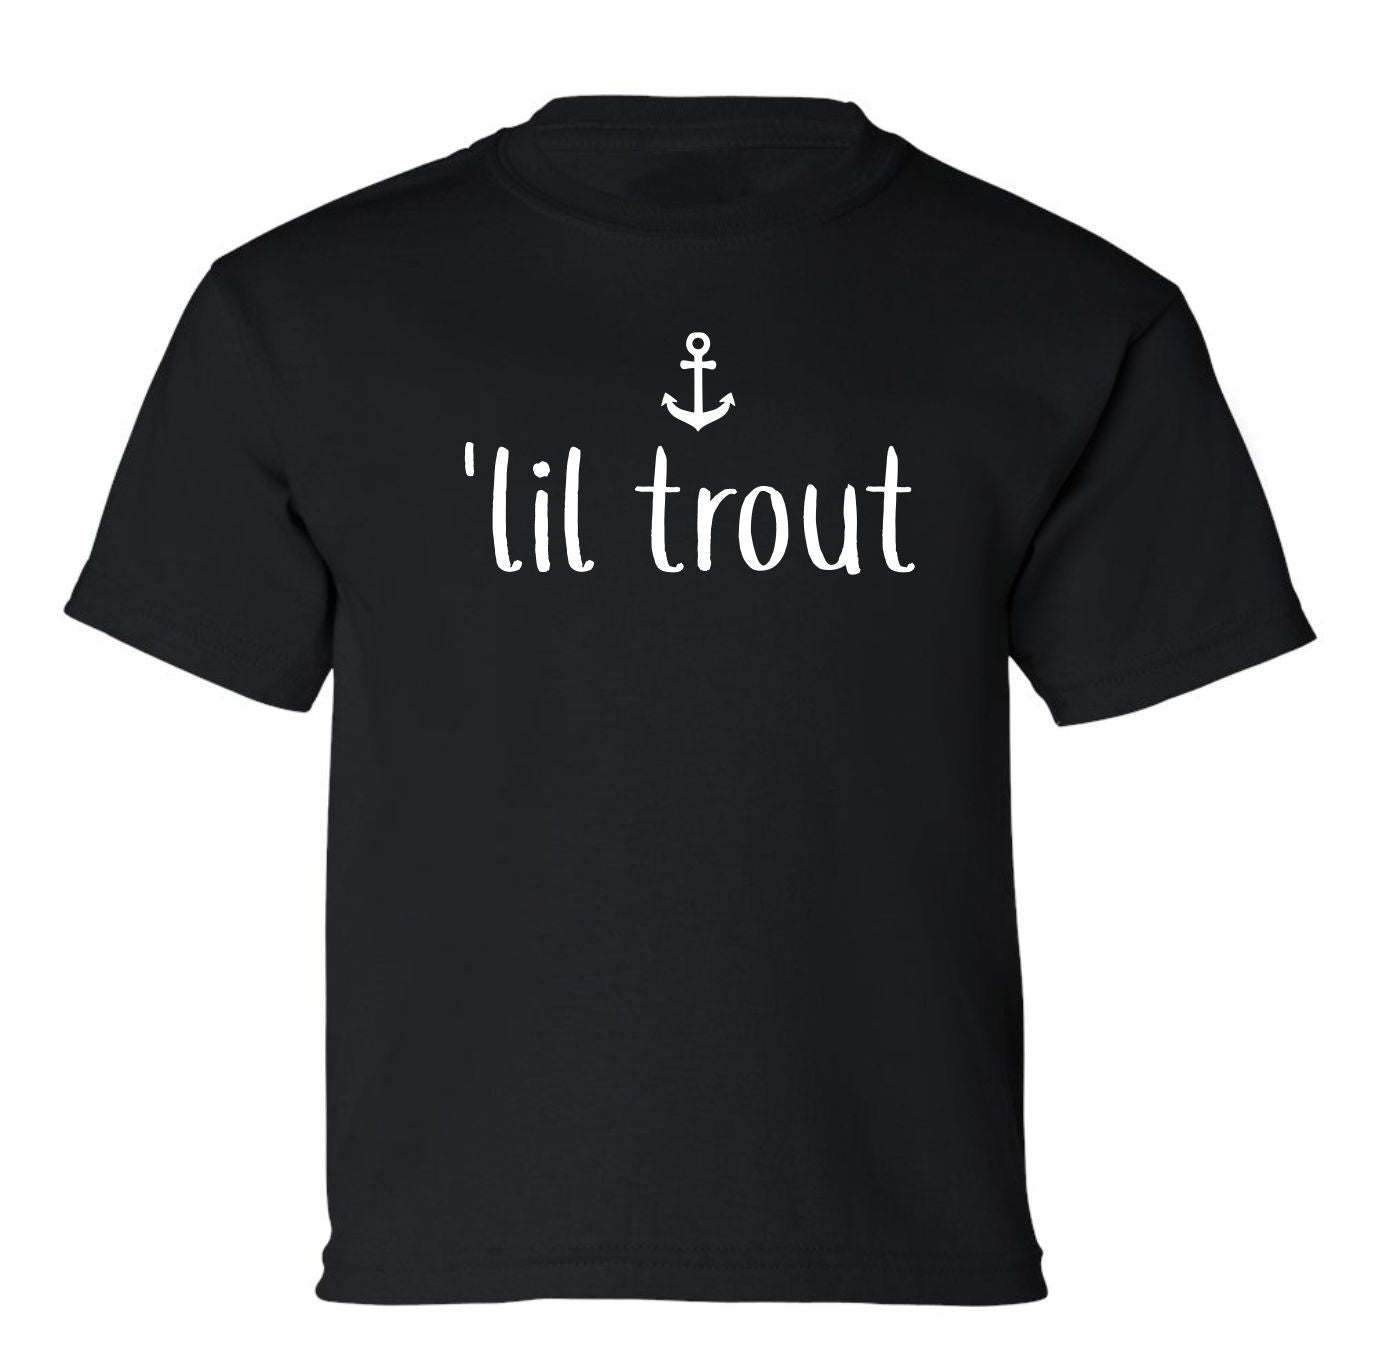 Lil Trout Toddler/Youth T-Shirt Black / Youth M